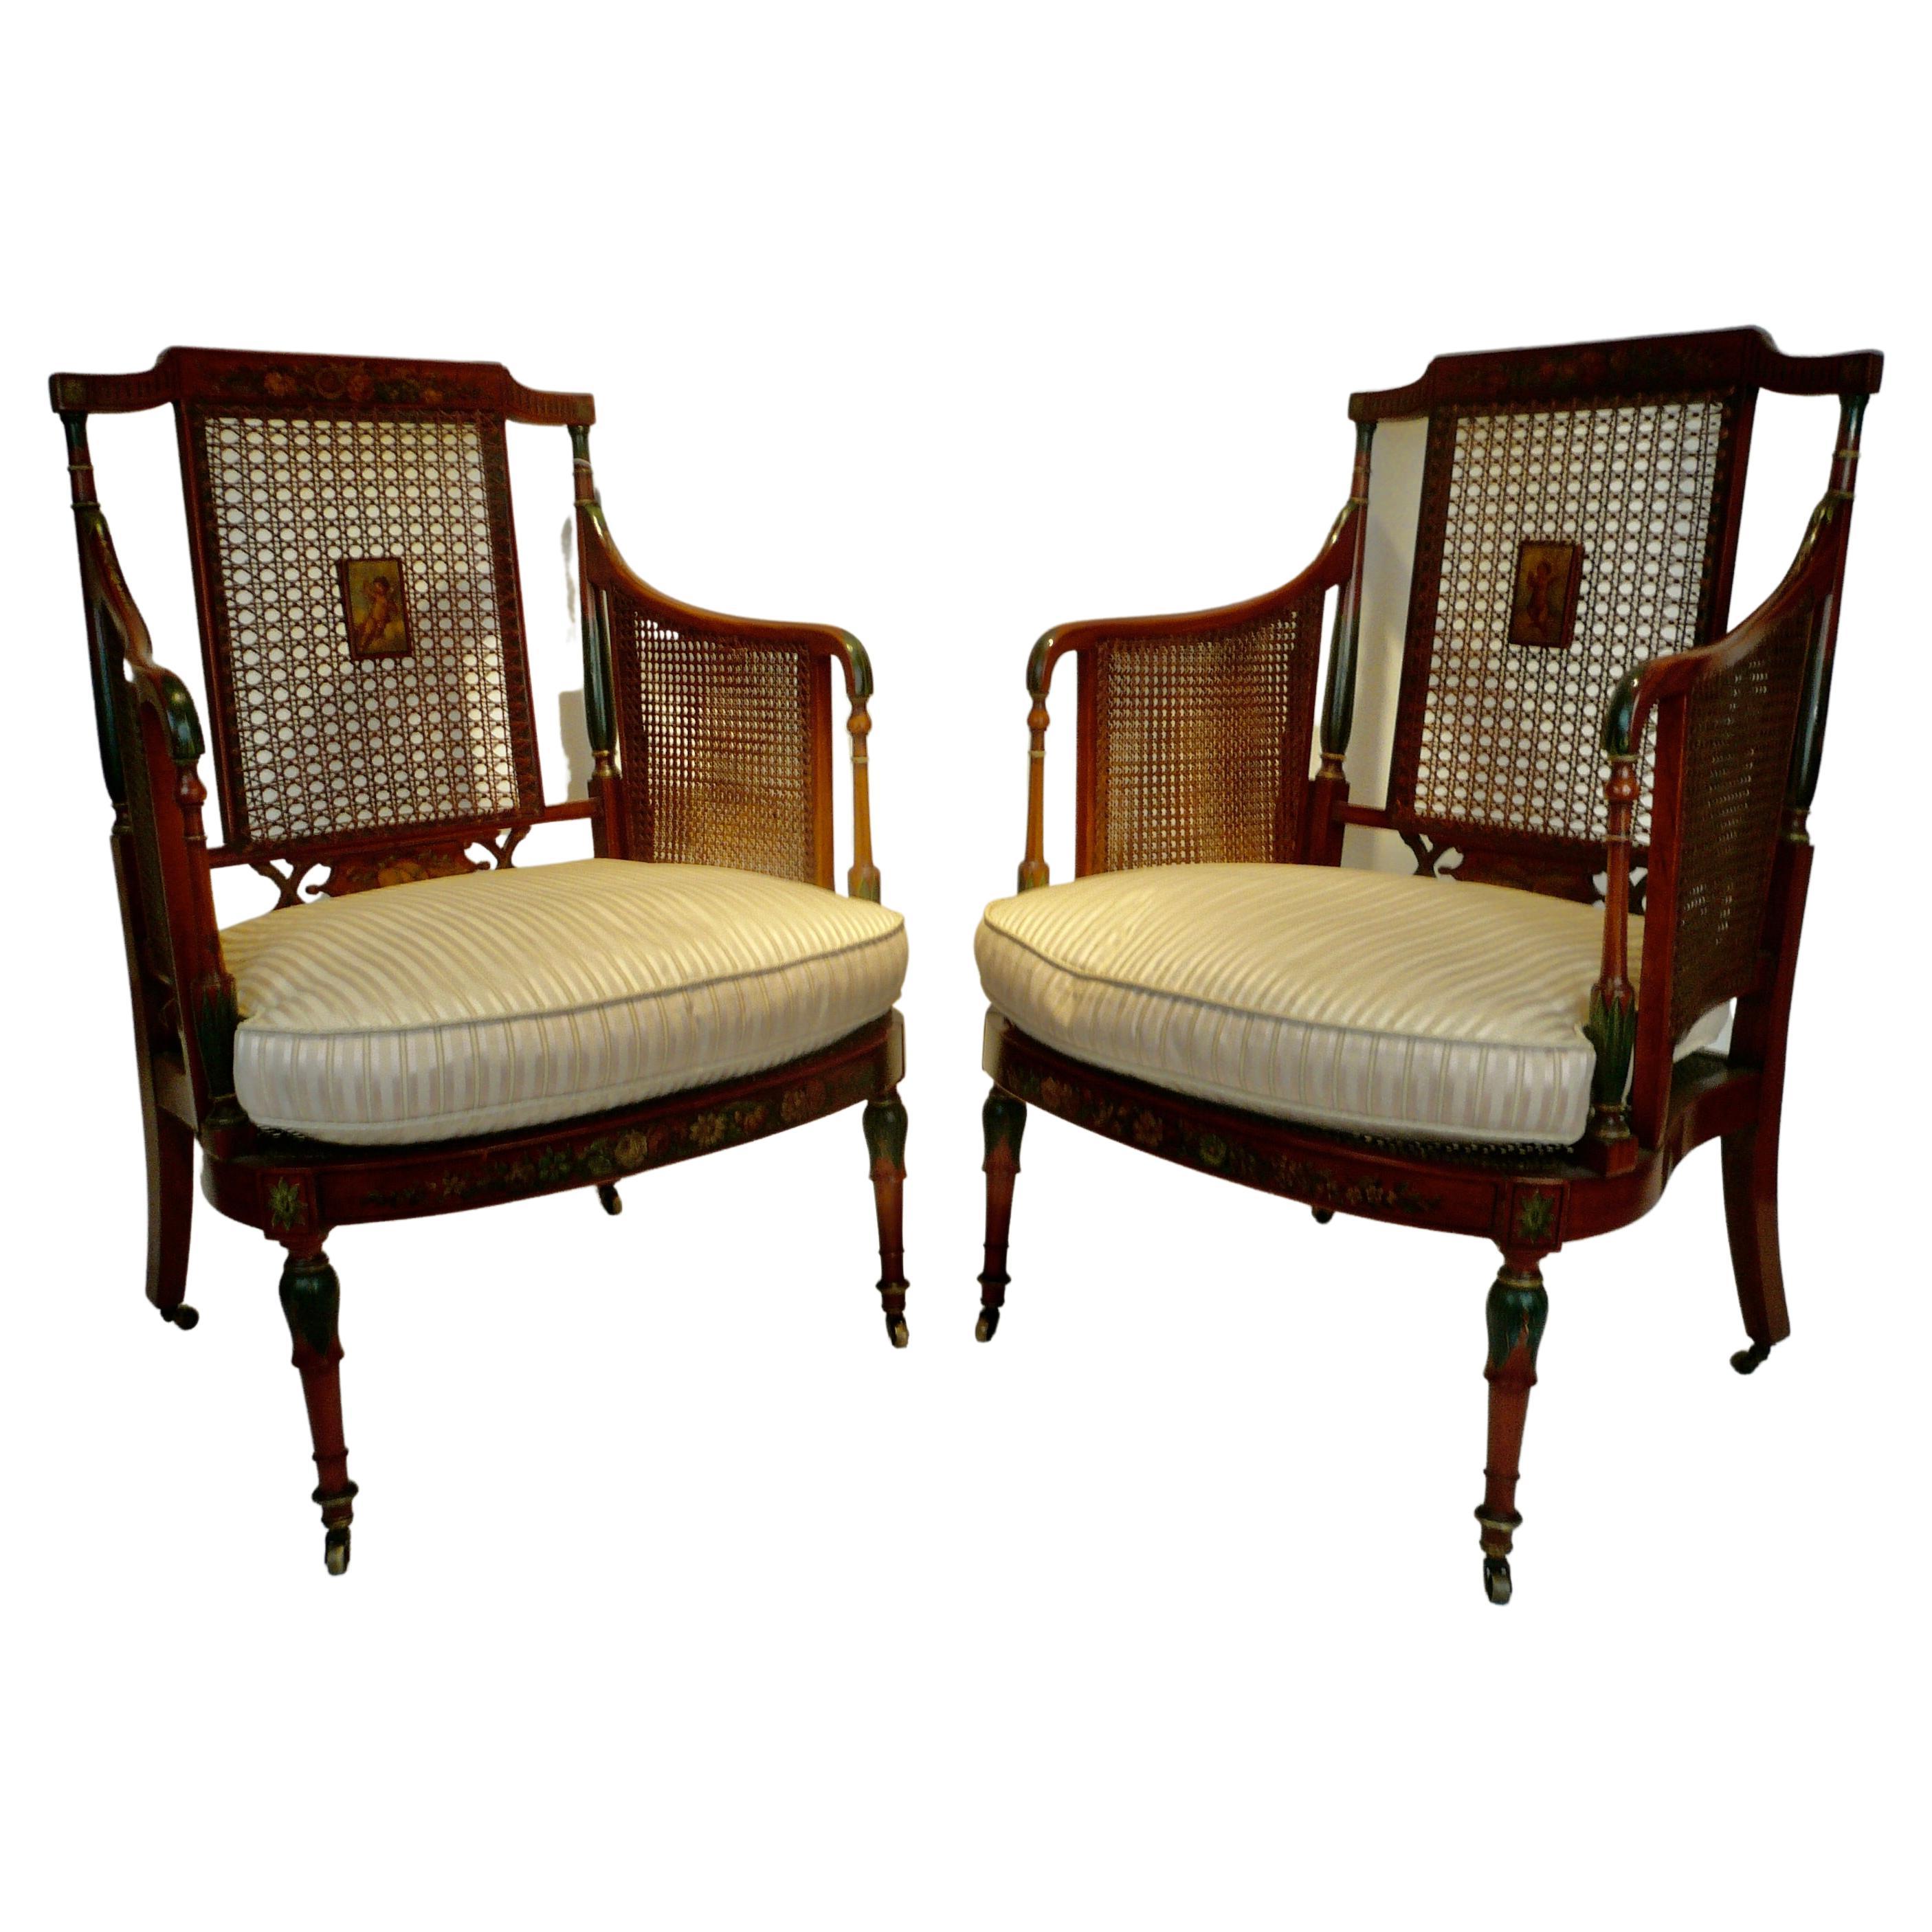 Pair of Edwardian Angelica Kaufmanstyle Painted Satinwood and Cane Armchairs